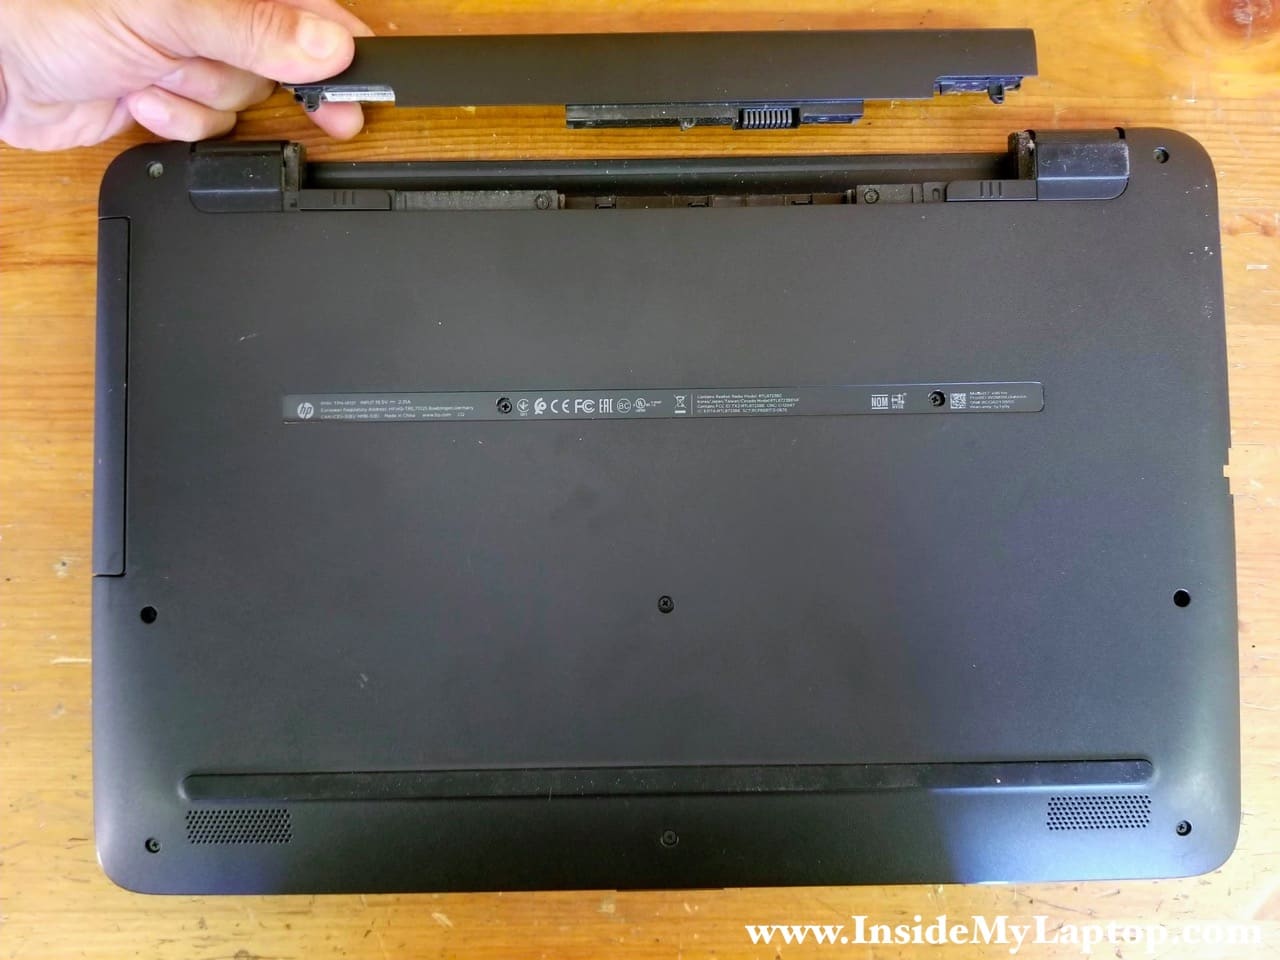 how to open dvd drive on hp laptop